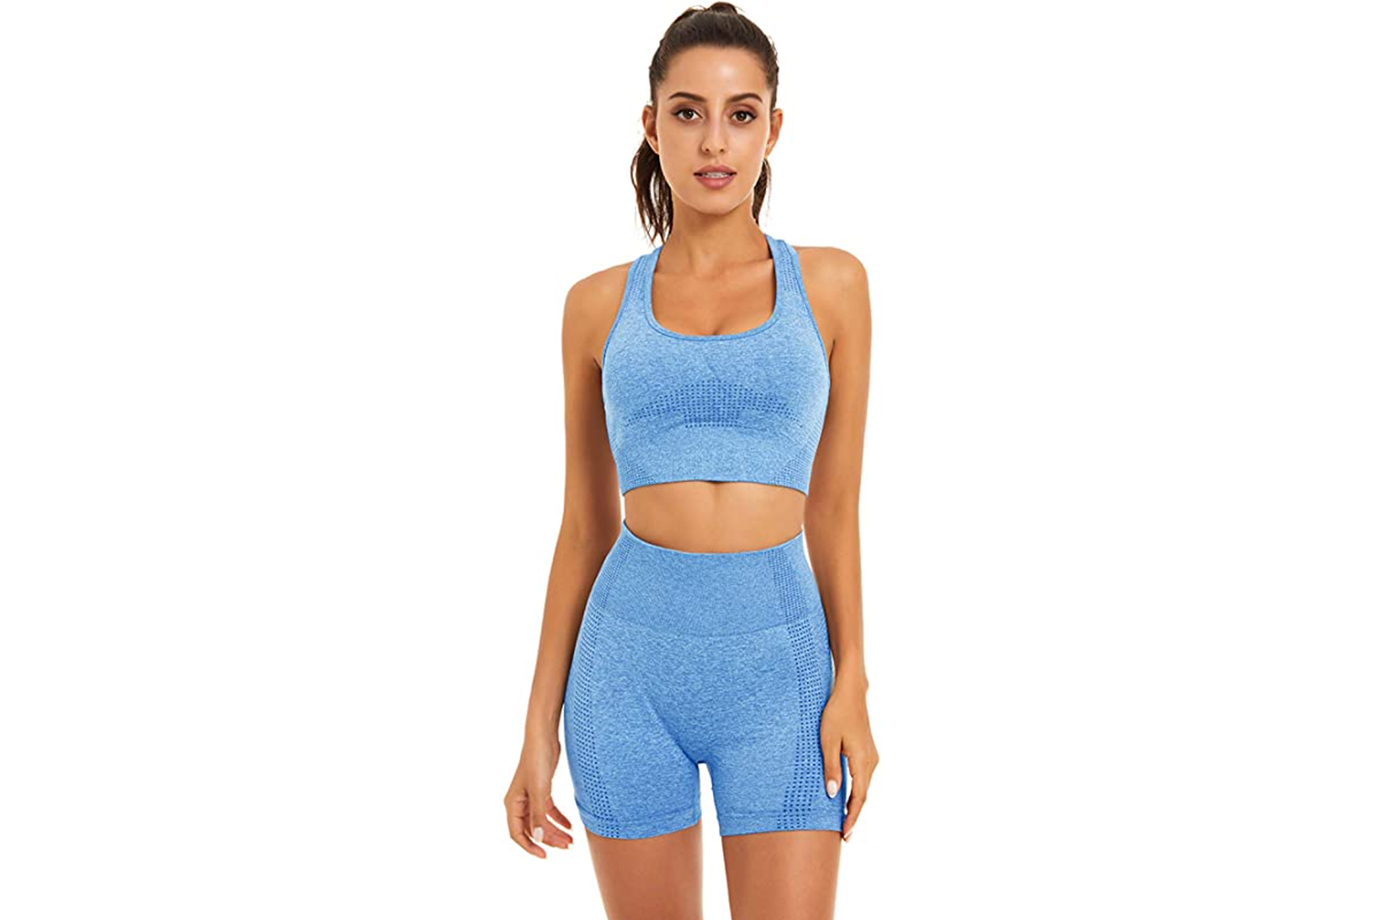 Toplook Women Seamless Yoga Workout Set 2 Piece Outfits Gym Shorts